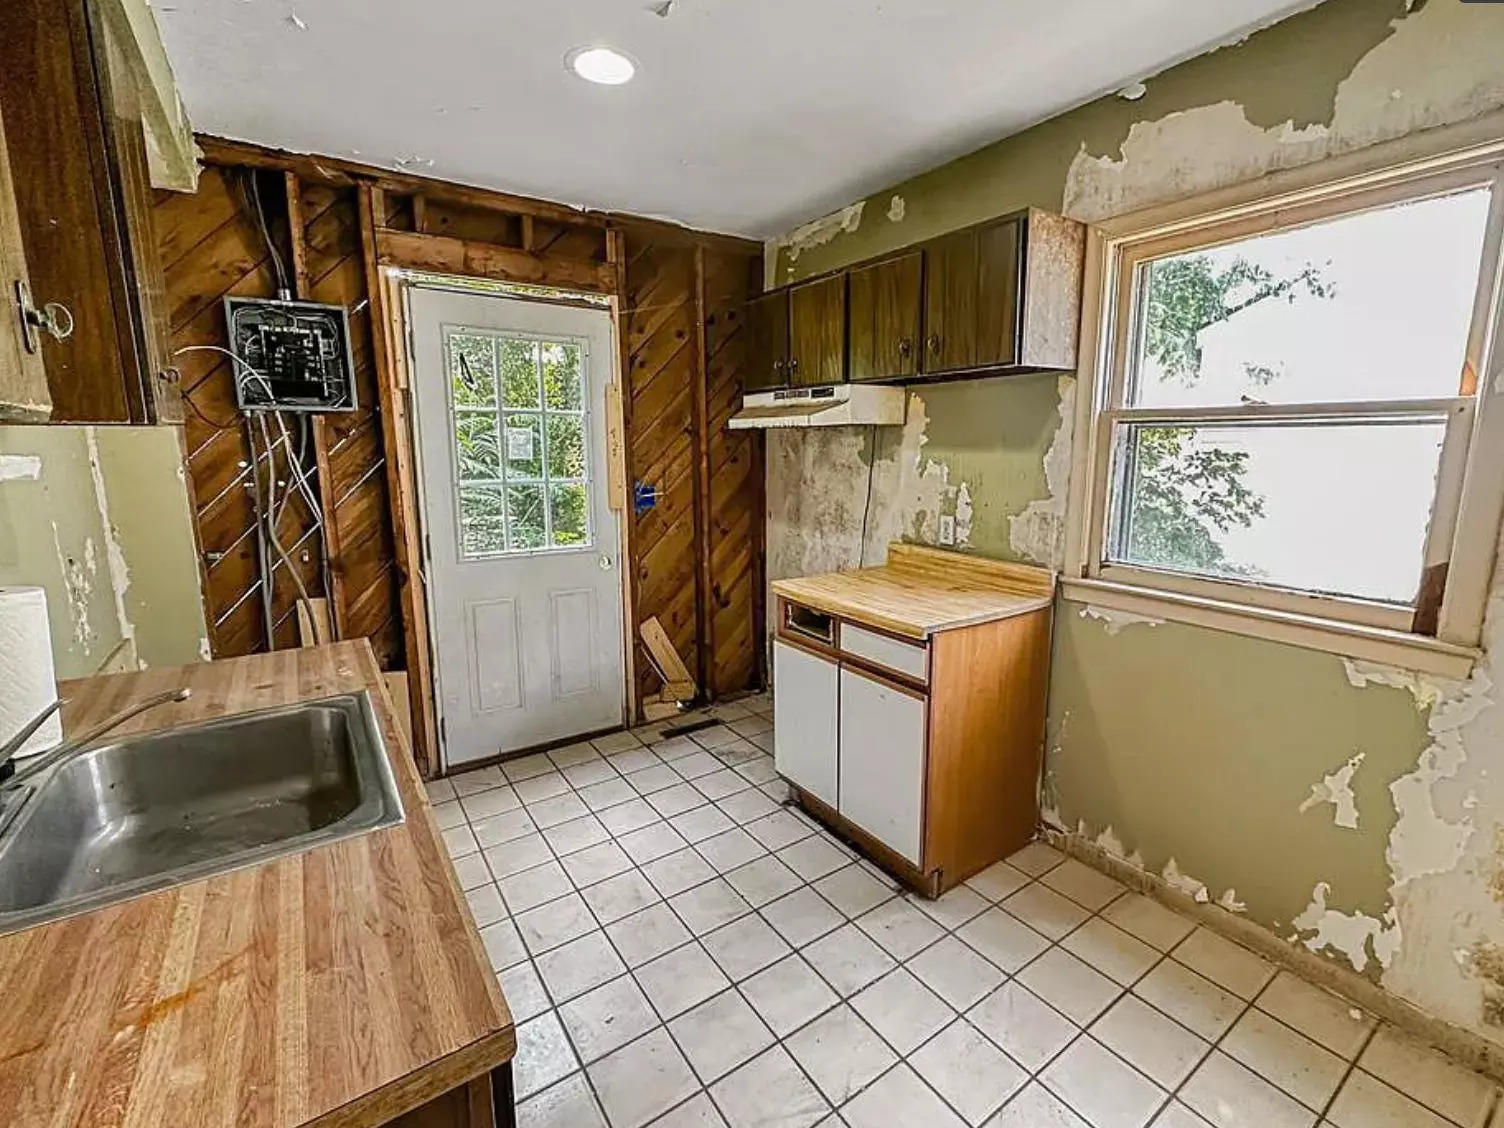 The kitchen of the $1 house in Michigan. The paint is peeling from the walls and the floor is covered in a layer of grime.